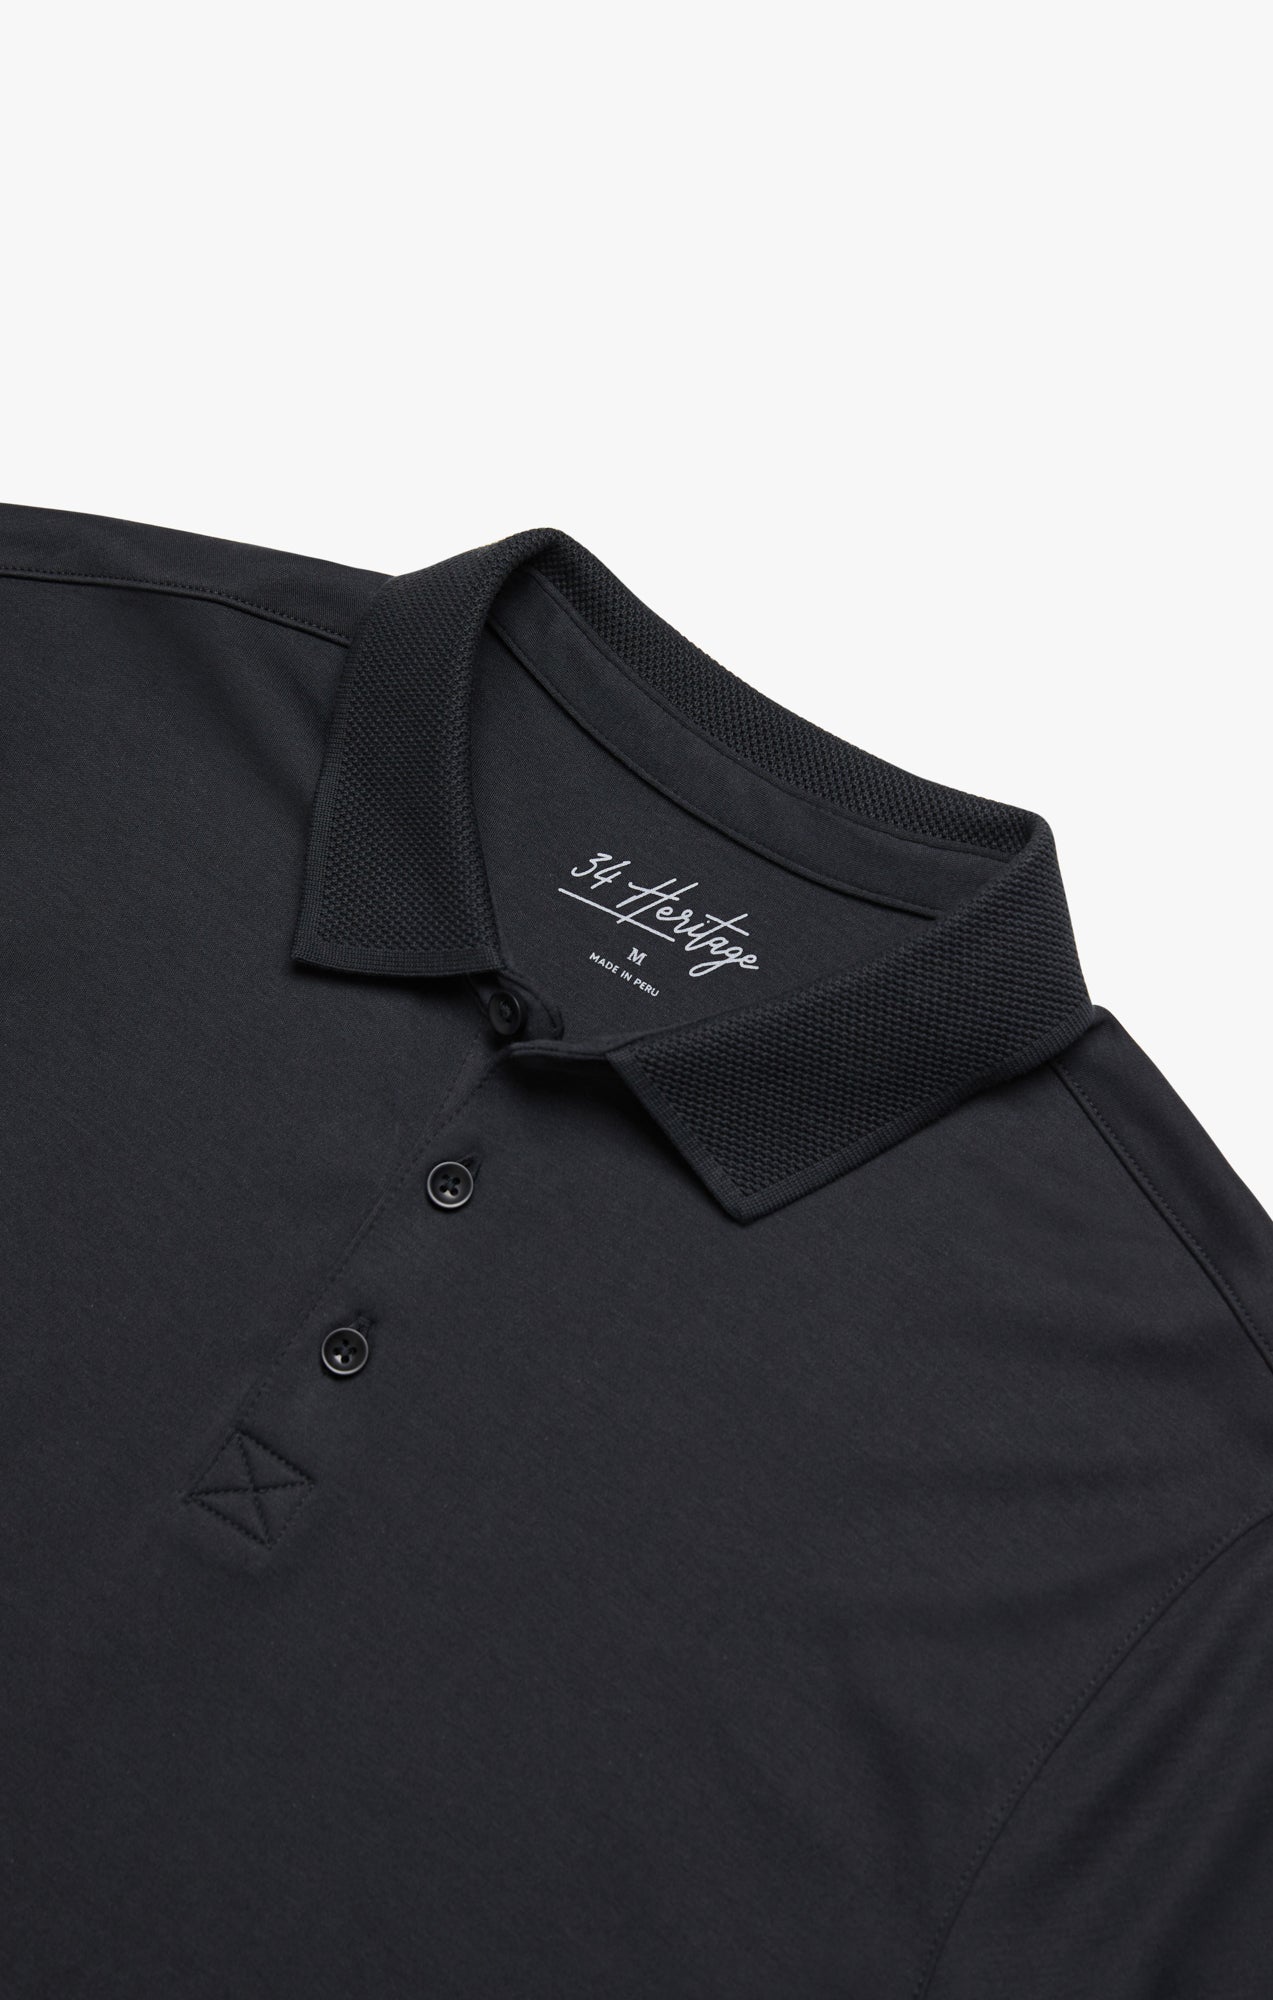 Polo T-Shirt In Black Image 9